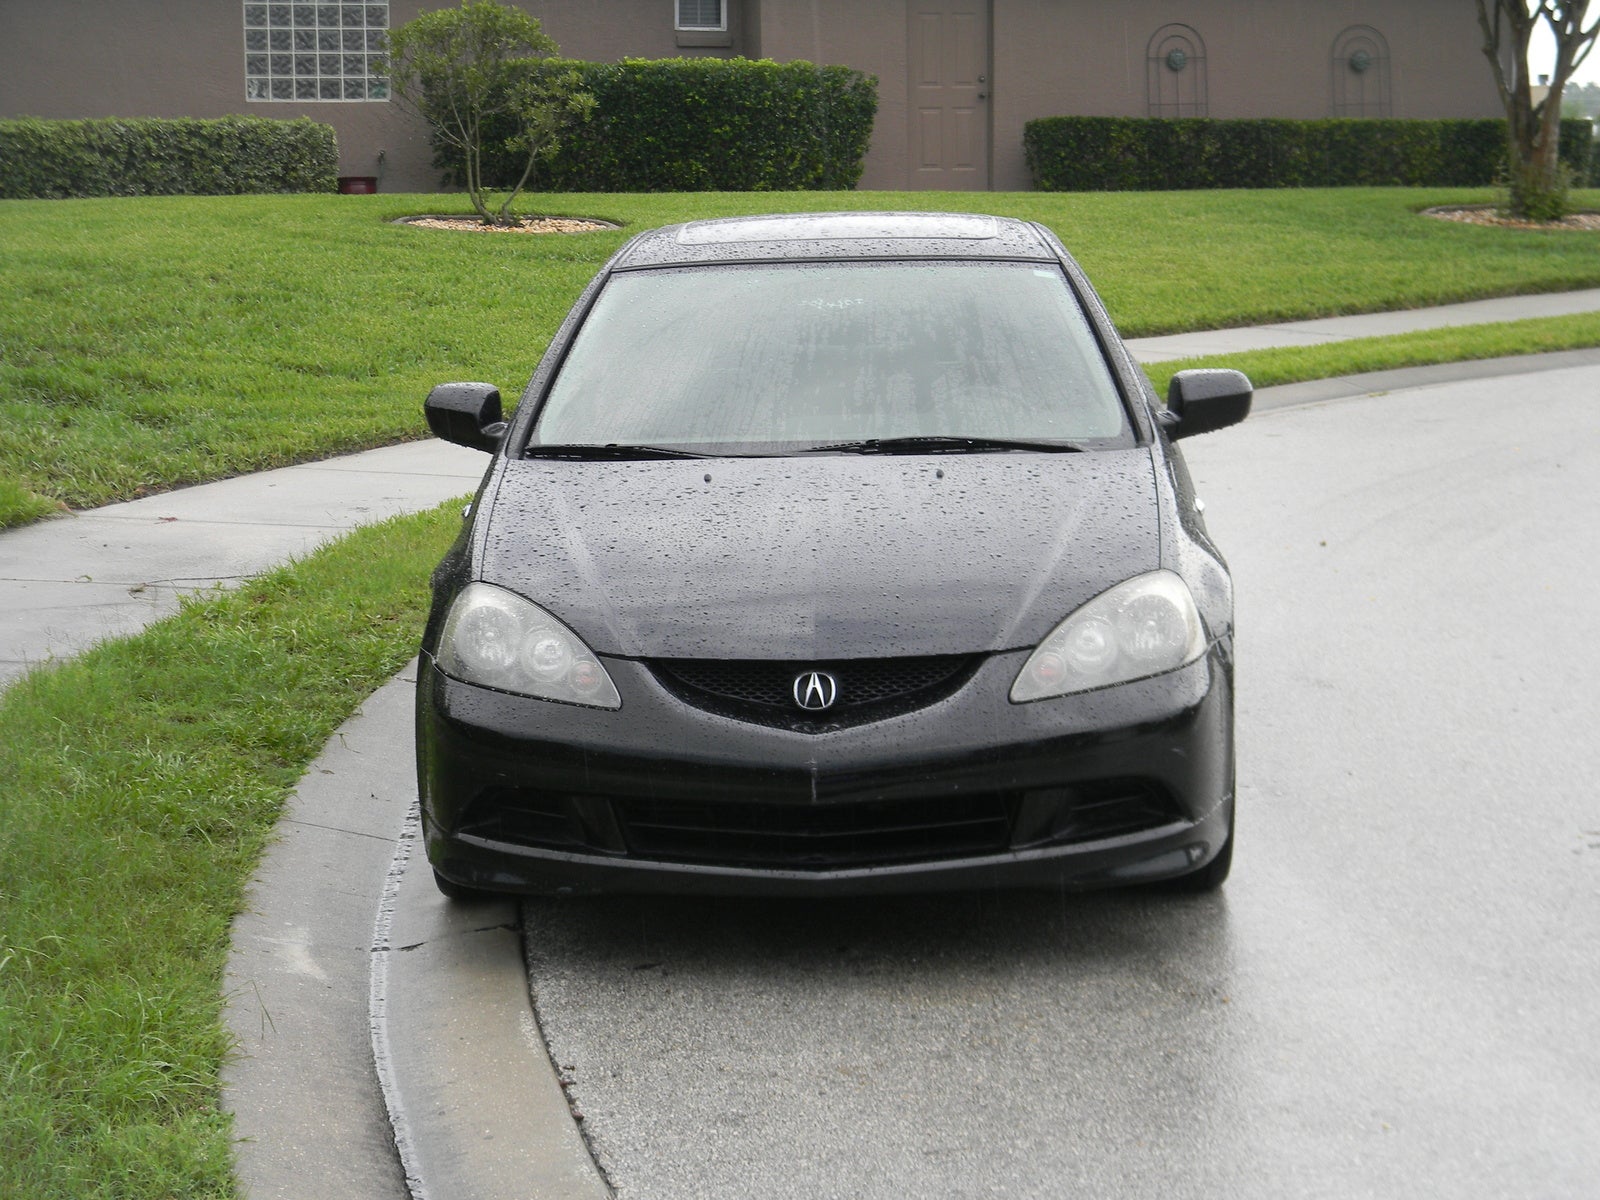 2006 Acura RSX - Pictures - 2006 Acura RSX Type-S picture - CarGurus